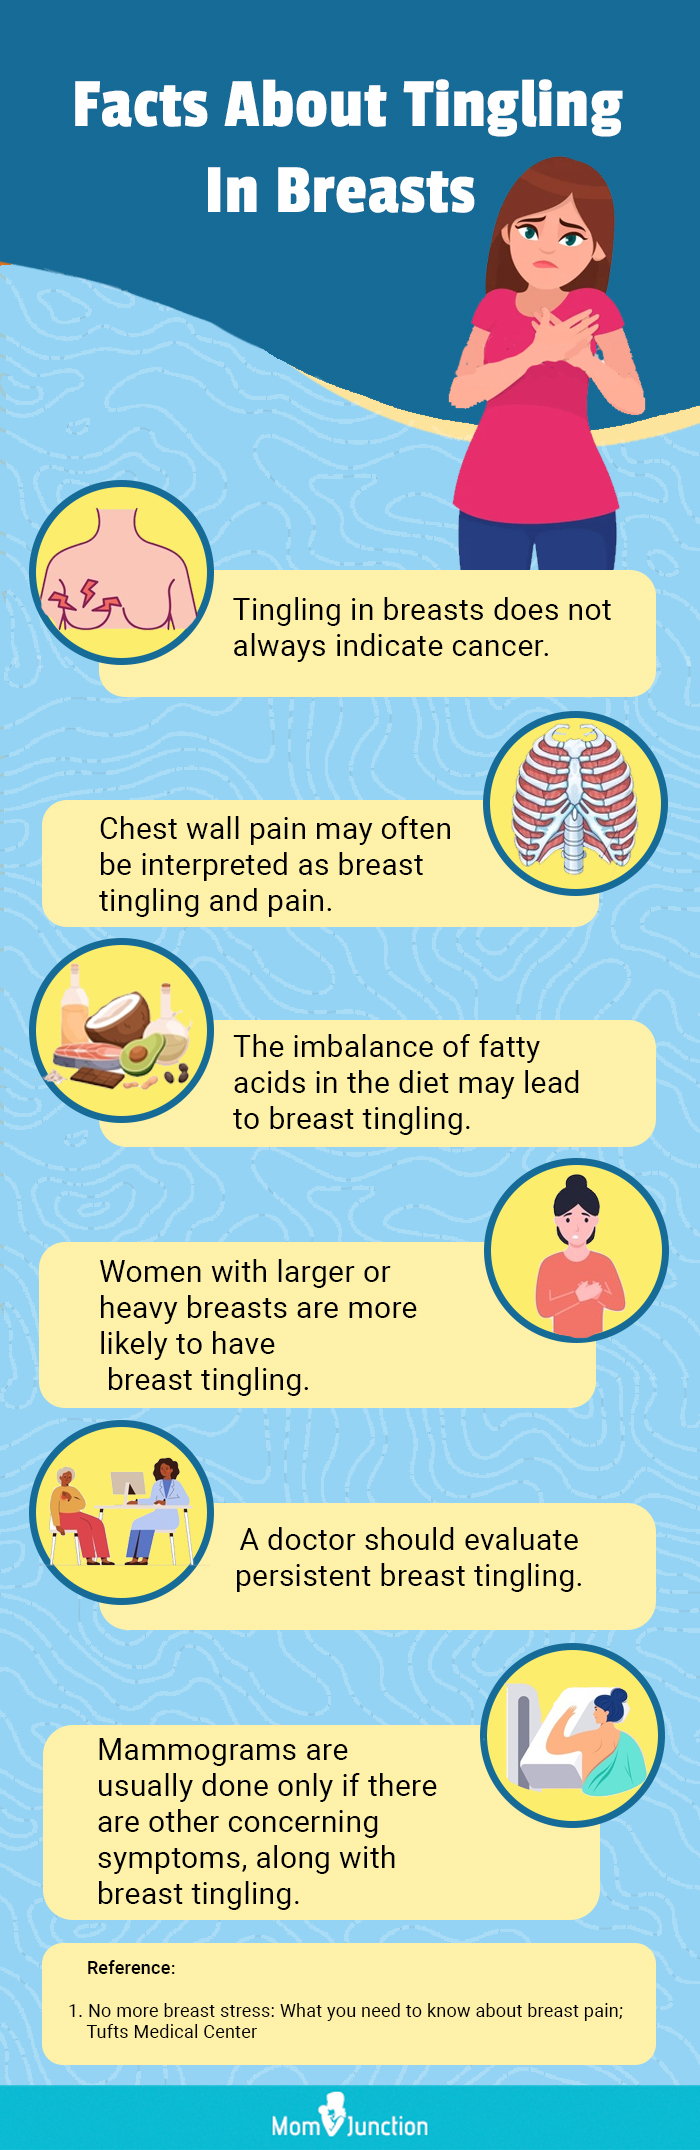 https://www.momjunction.com/wp-content/uploads/2018/12/Infographic-Can-Tingling-In-Breasts-Indicate-Something-Serious.jpg